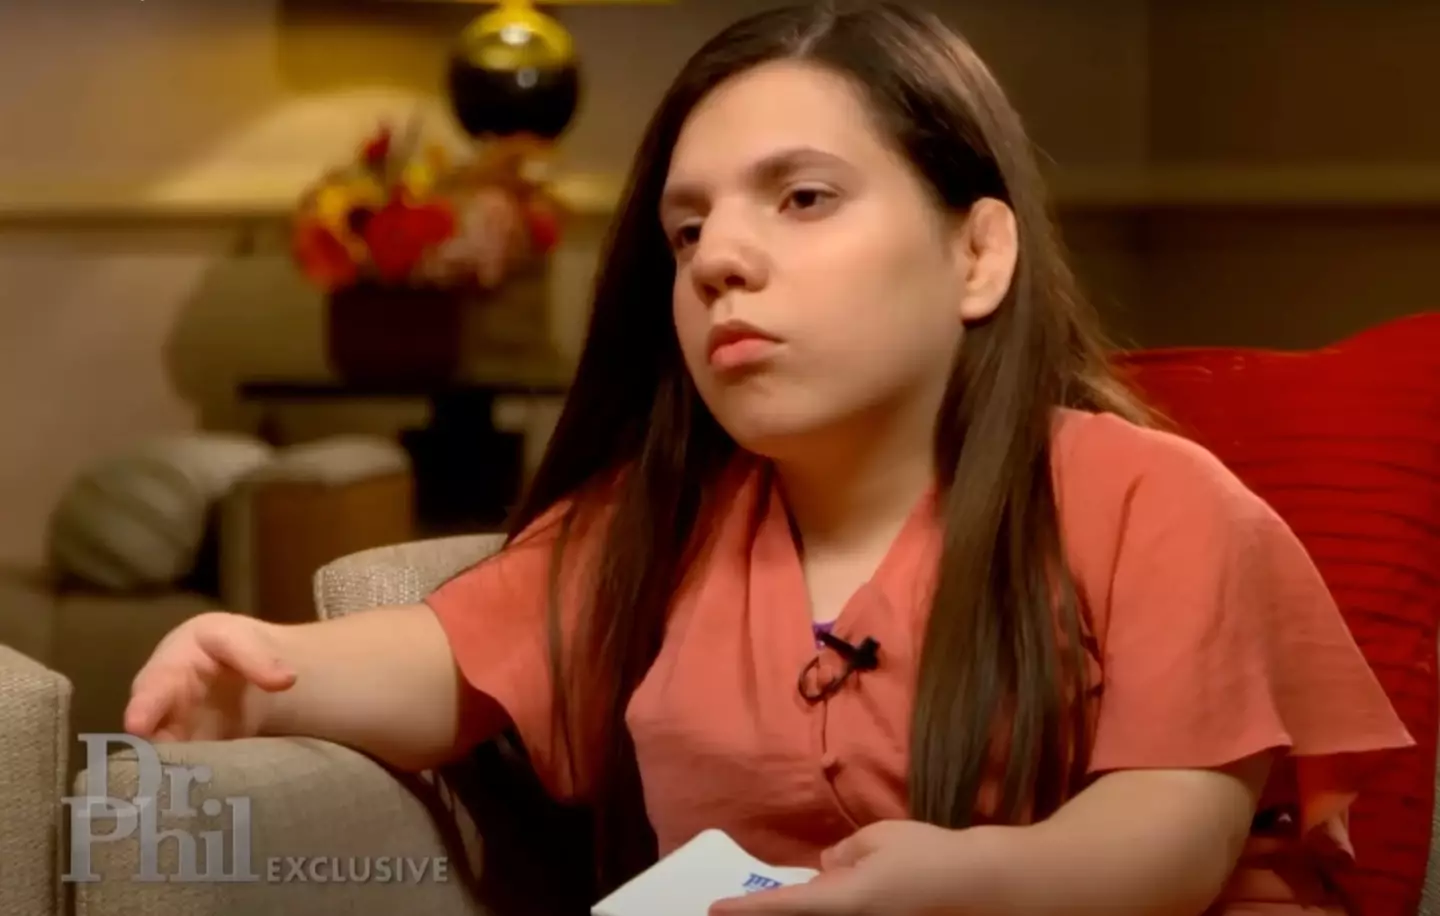 The 22-year-old who posed as a 'six-year-old Ukrainian orphan' says she 'thought she'd found the right family' amid claims that she tried to kill them.